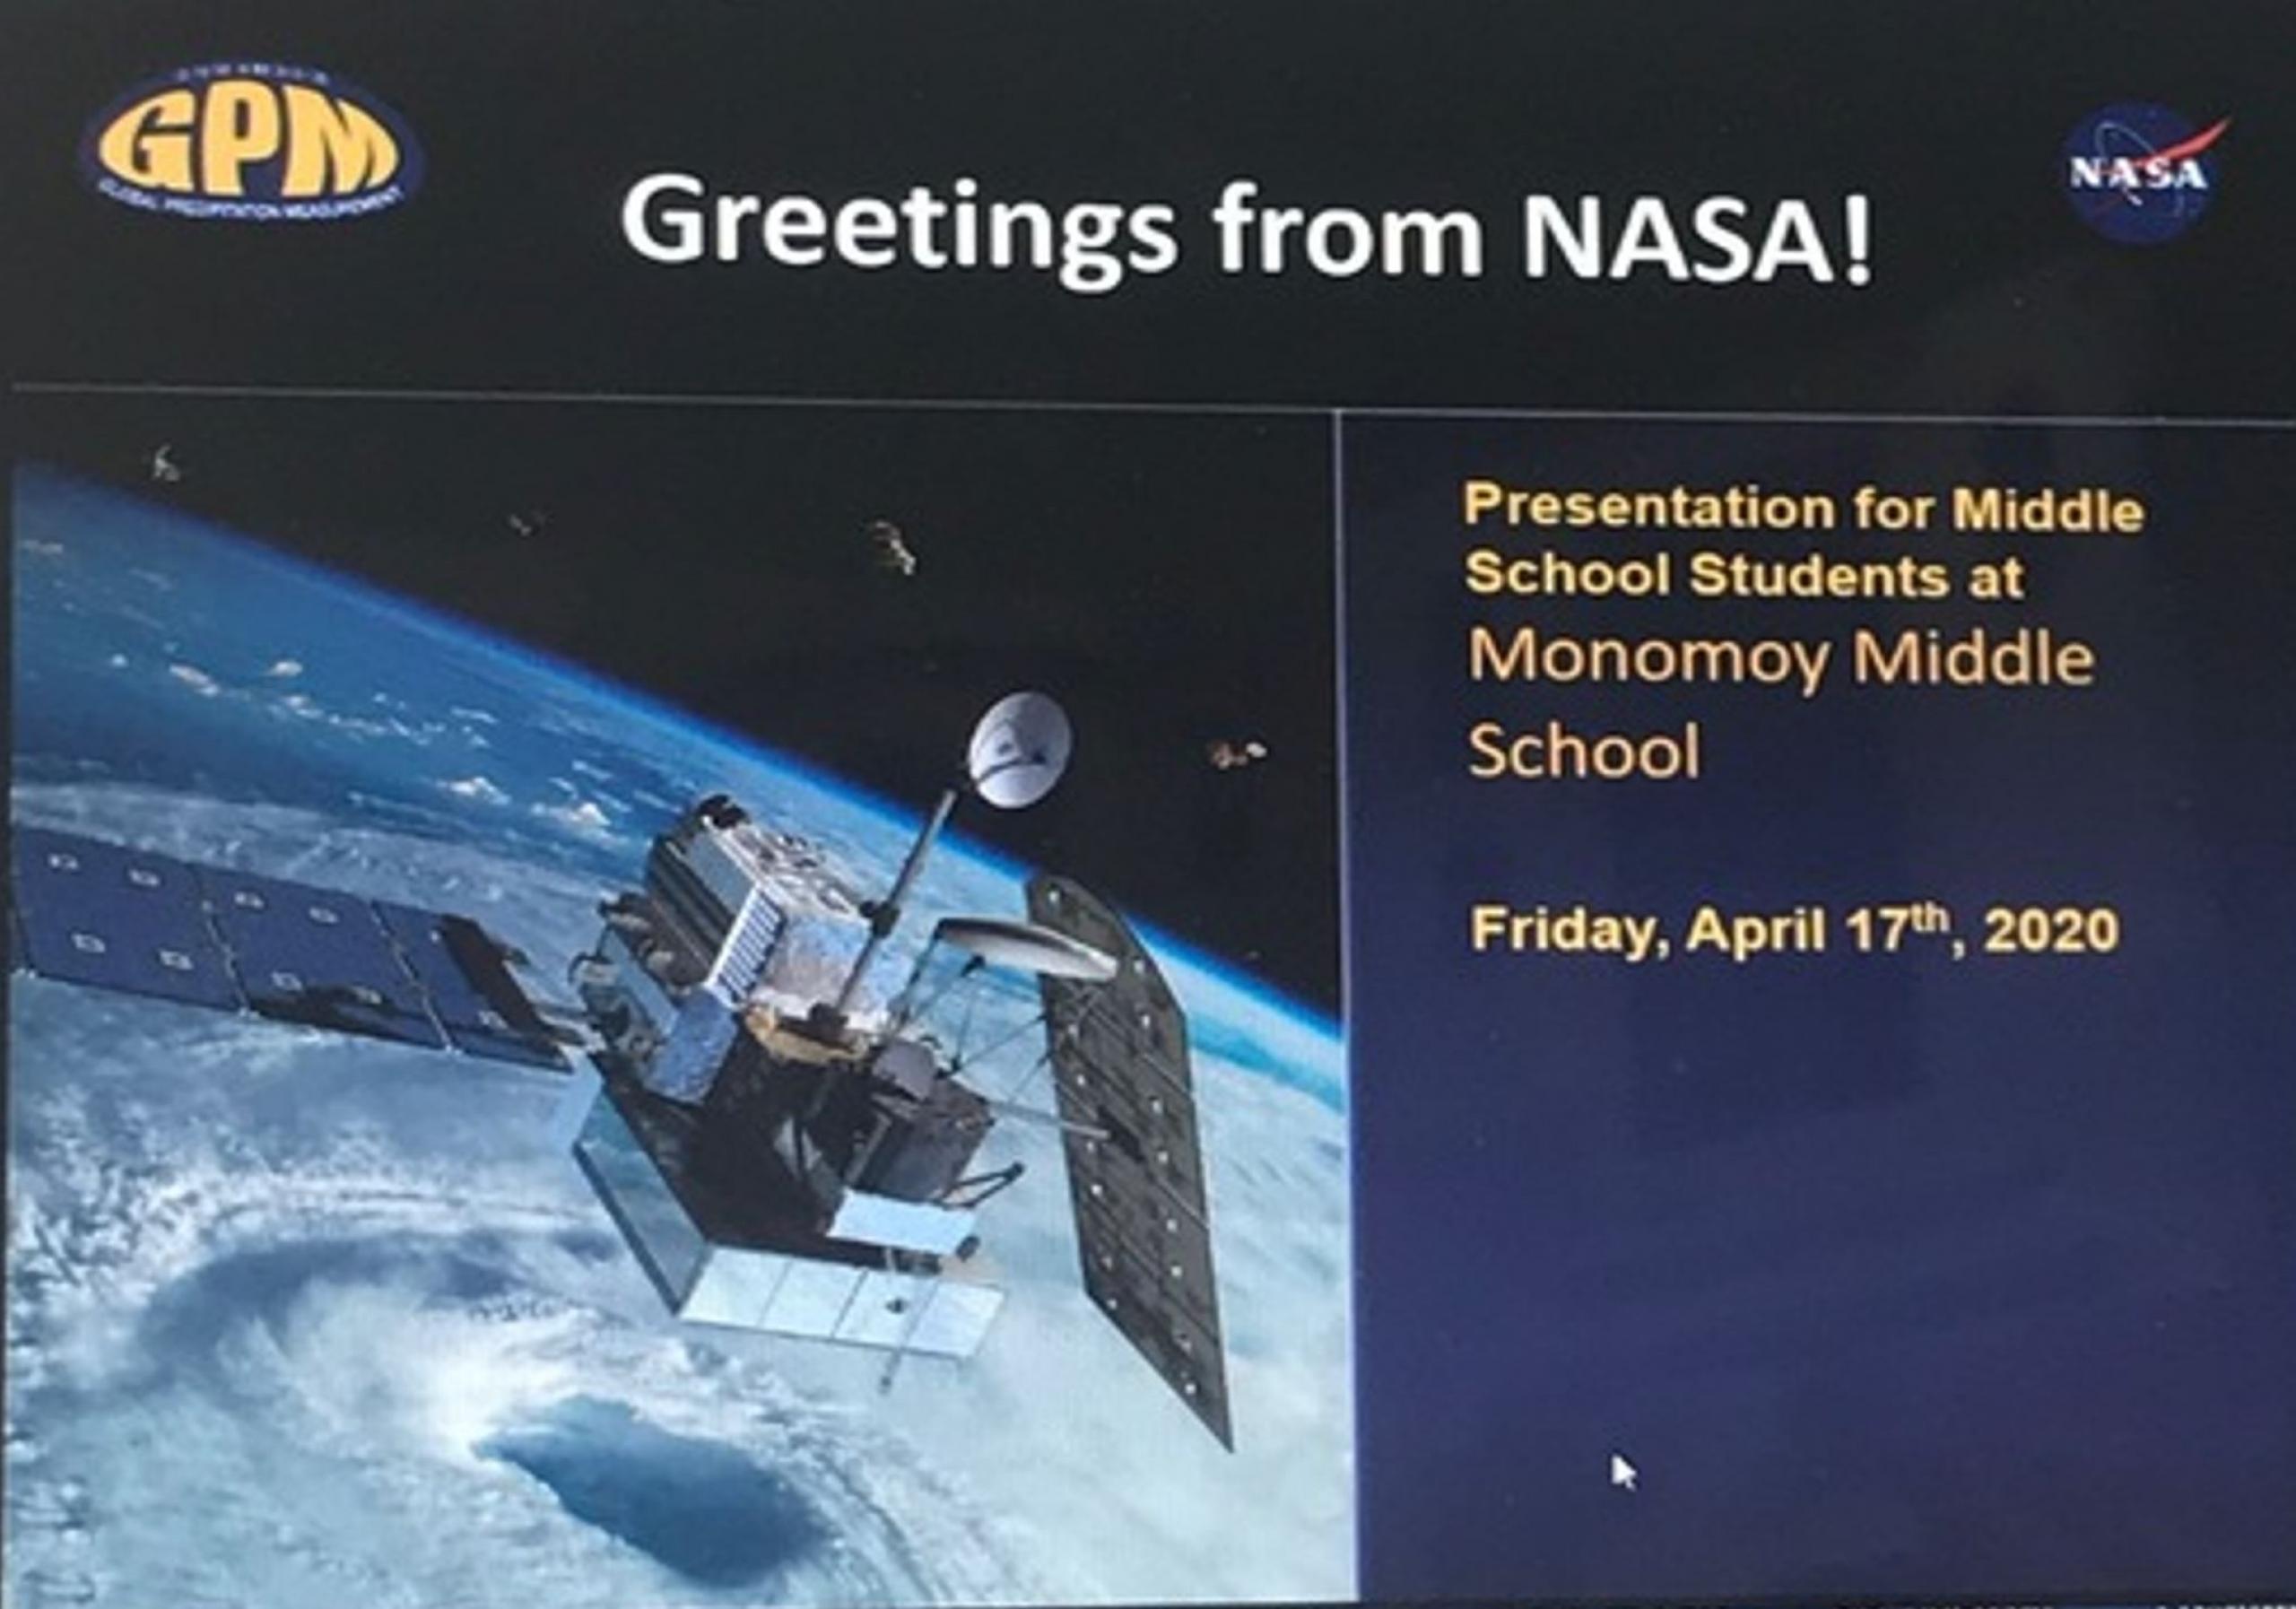 Picture of a slide titled "Greetings from NASA!" with a satellite. It also reads "Presentation for middle school students at Monomoy Middle School".